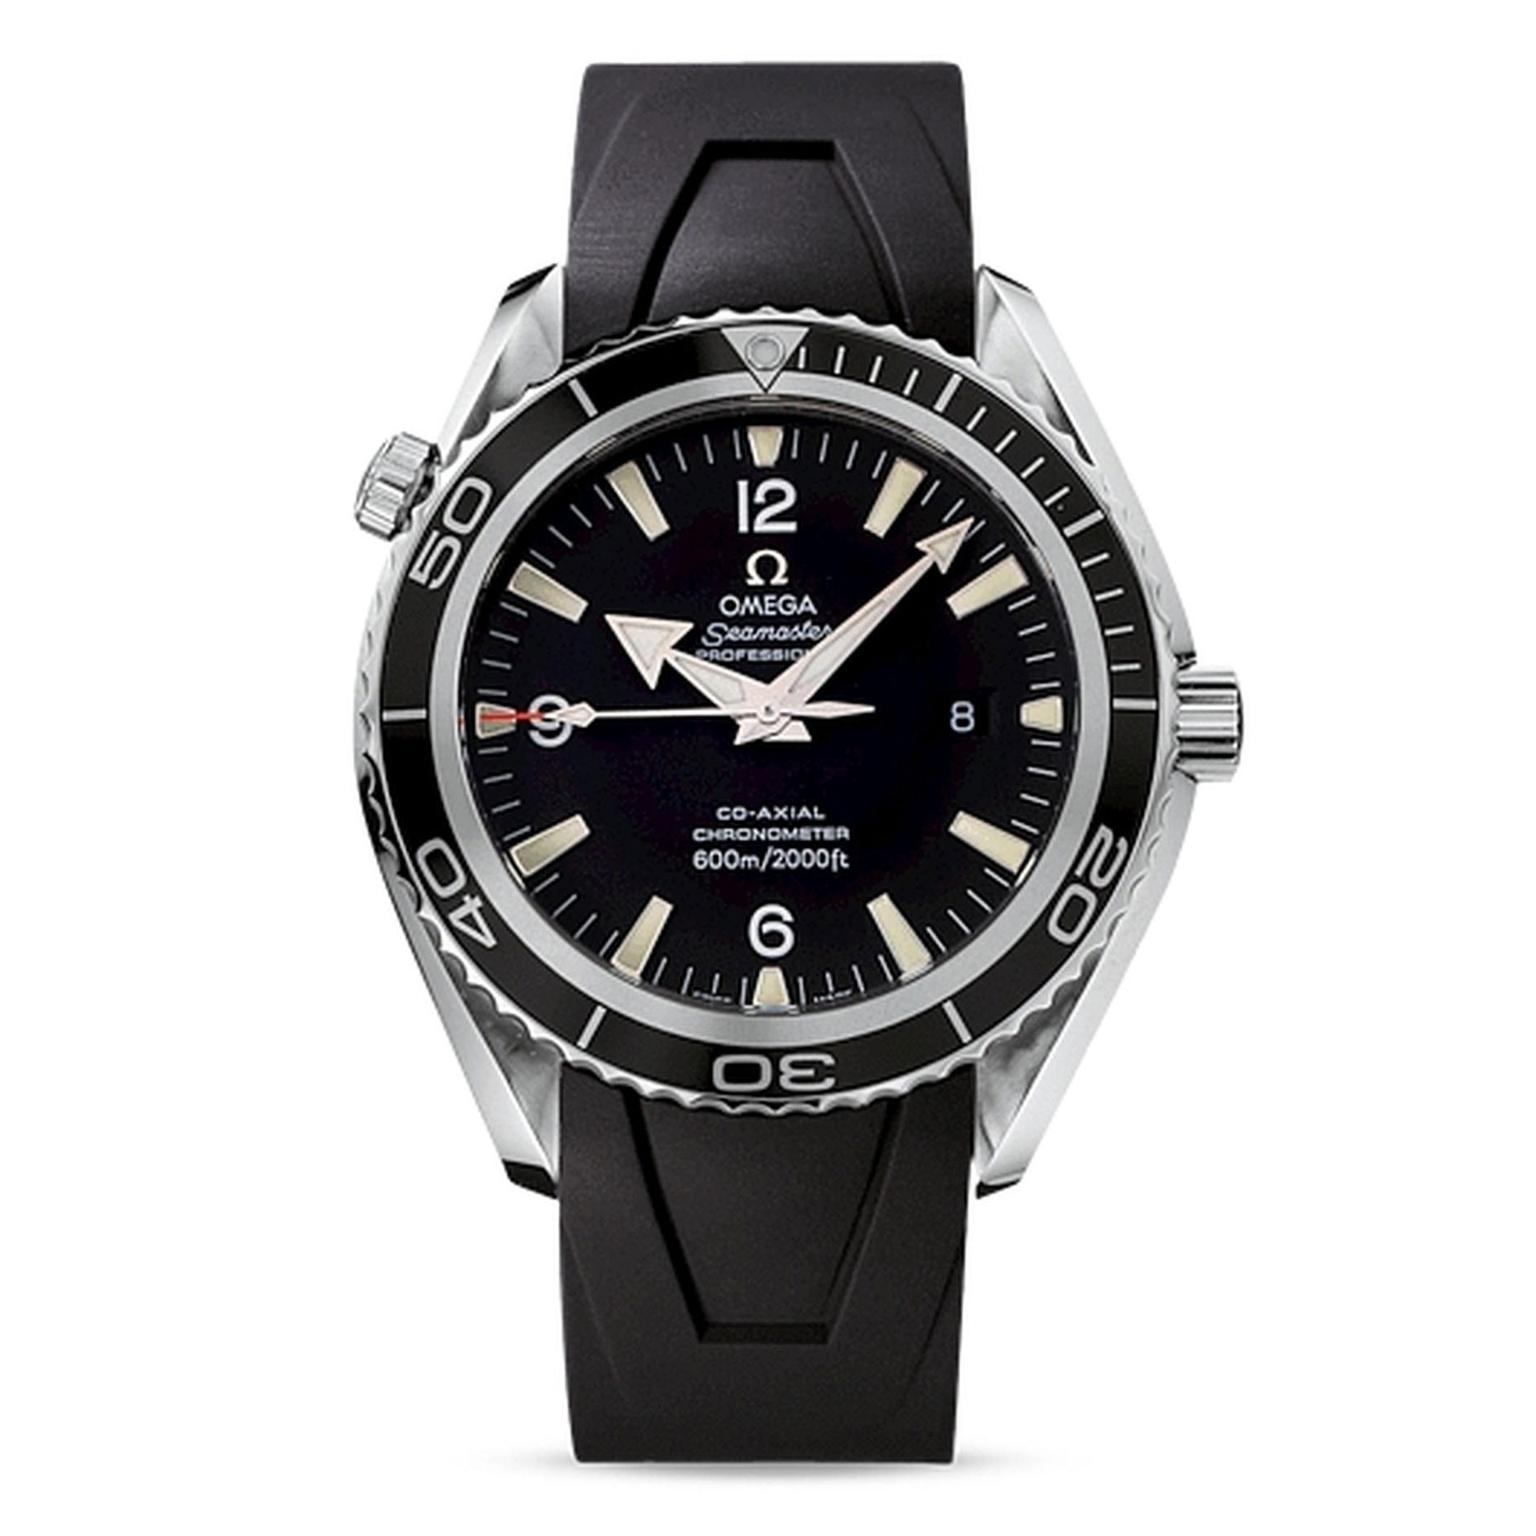 The Omega Seamaster Planet Ocean watch worn by Daniel Craig as James Bond in Casino Royale.